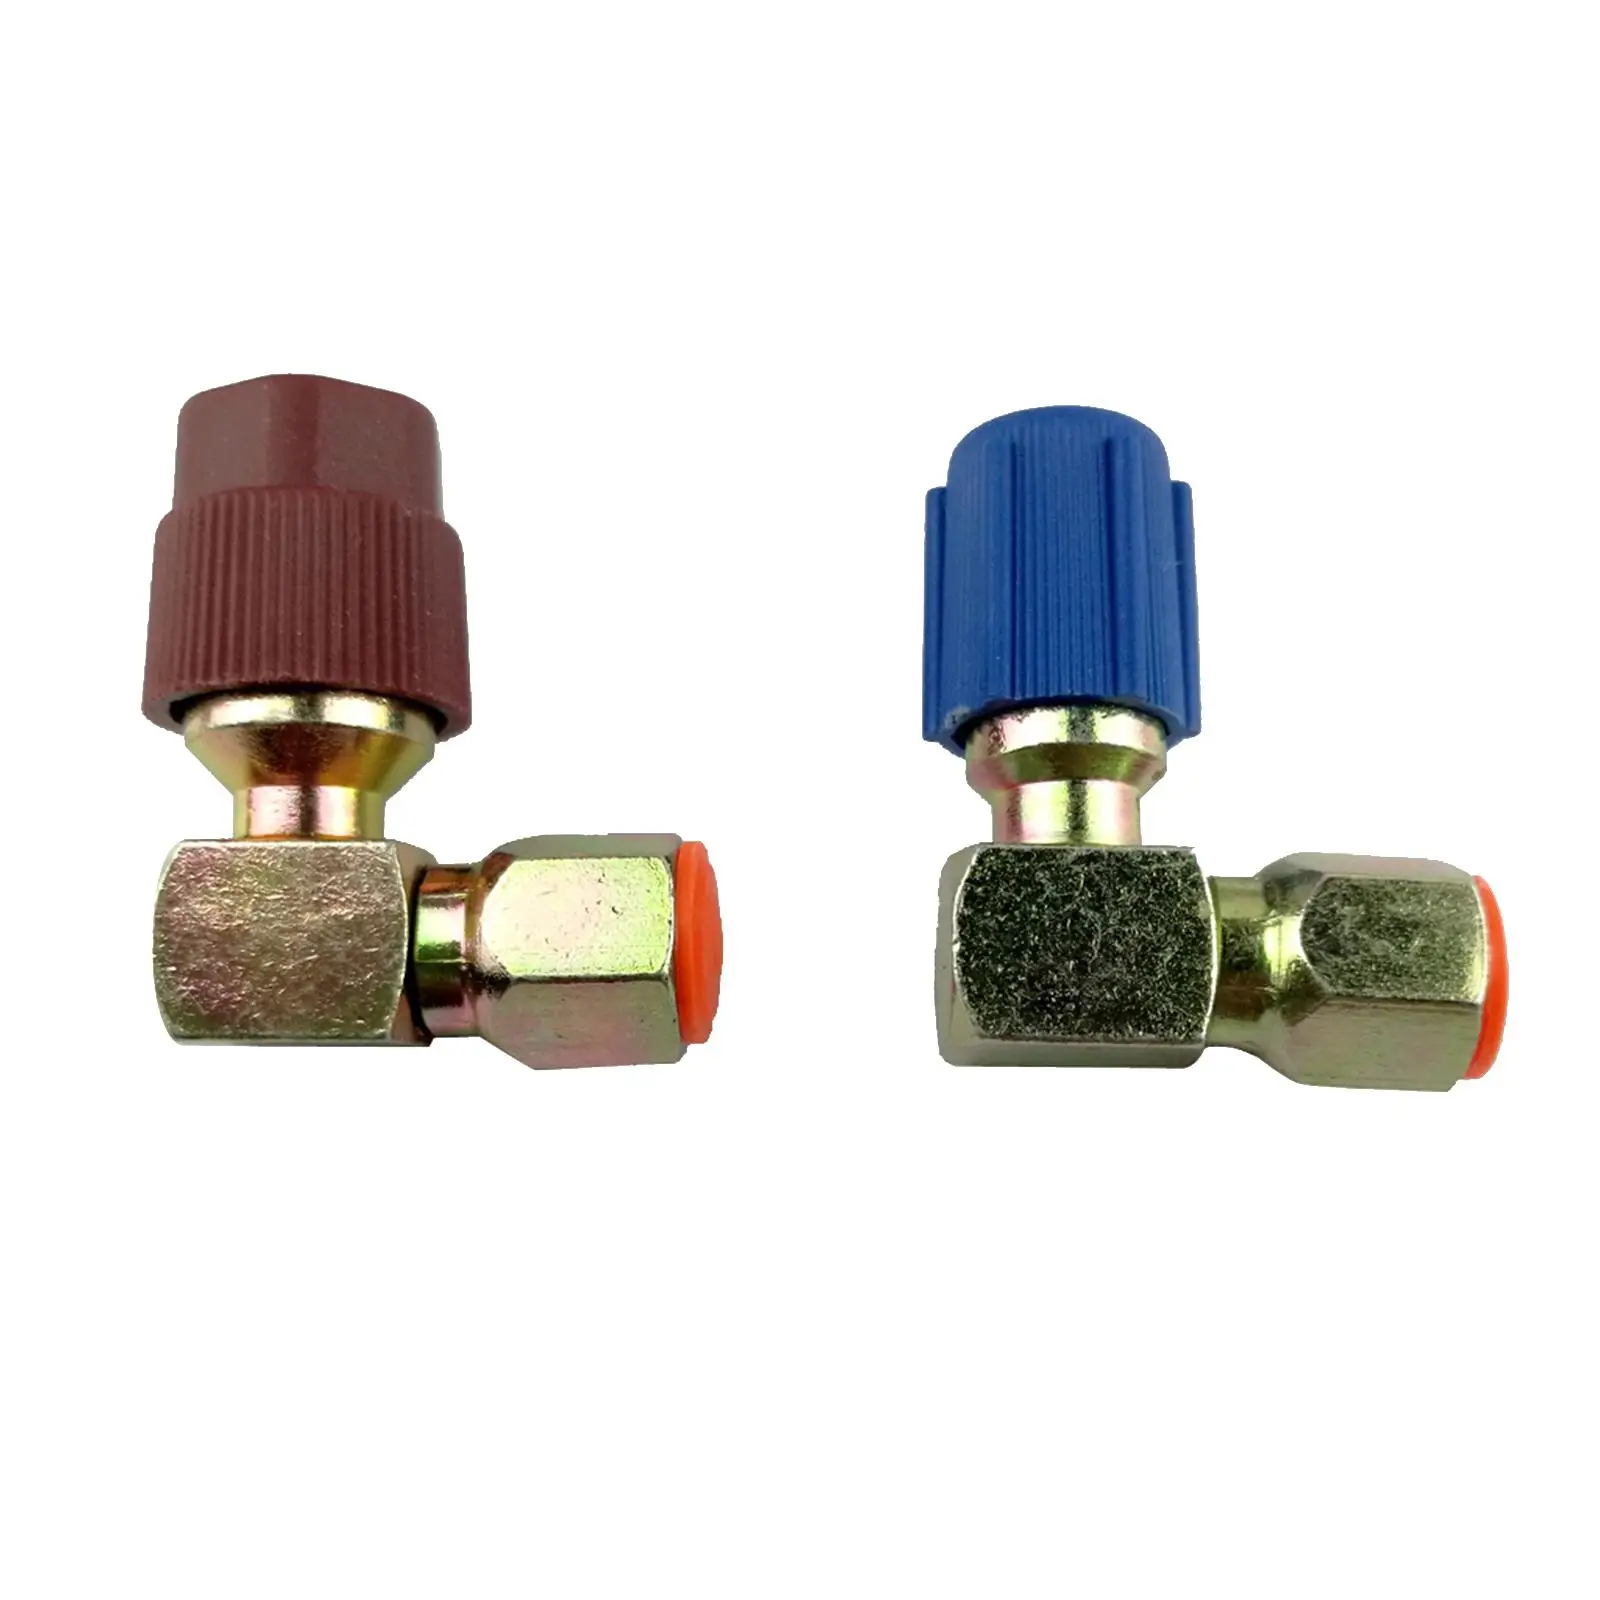 2/C High+Low Side Coupler R12 /R134a Adapter 90 Degrees Quick Connector